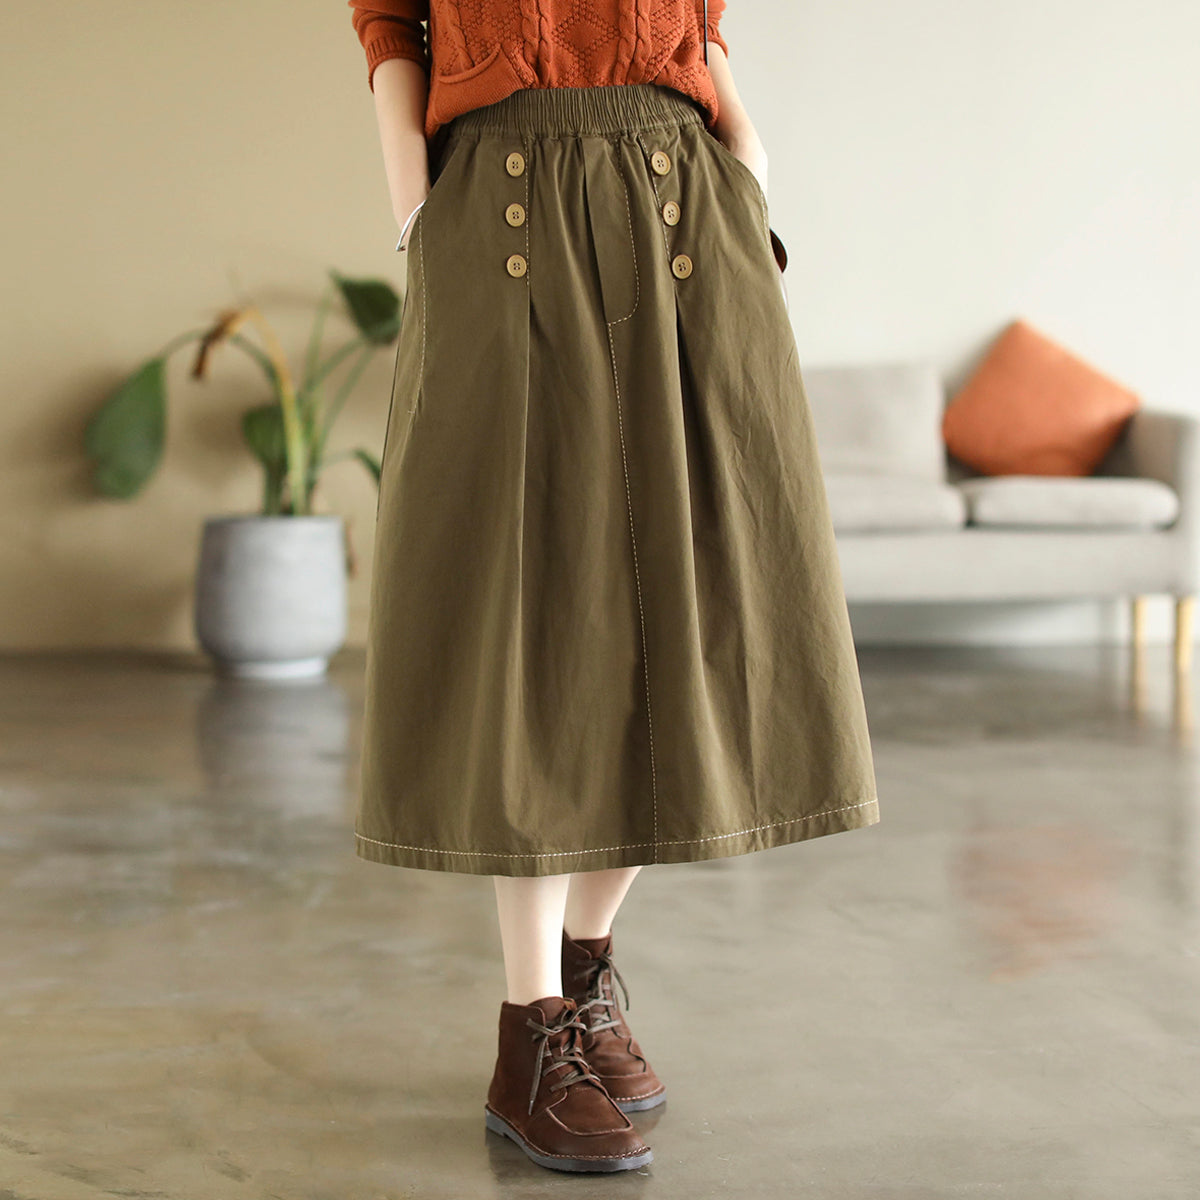 Early Autumn Retro Solid Cotton A-Line Skirt Sep 2022 New Arrival One Size Khaki 